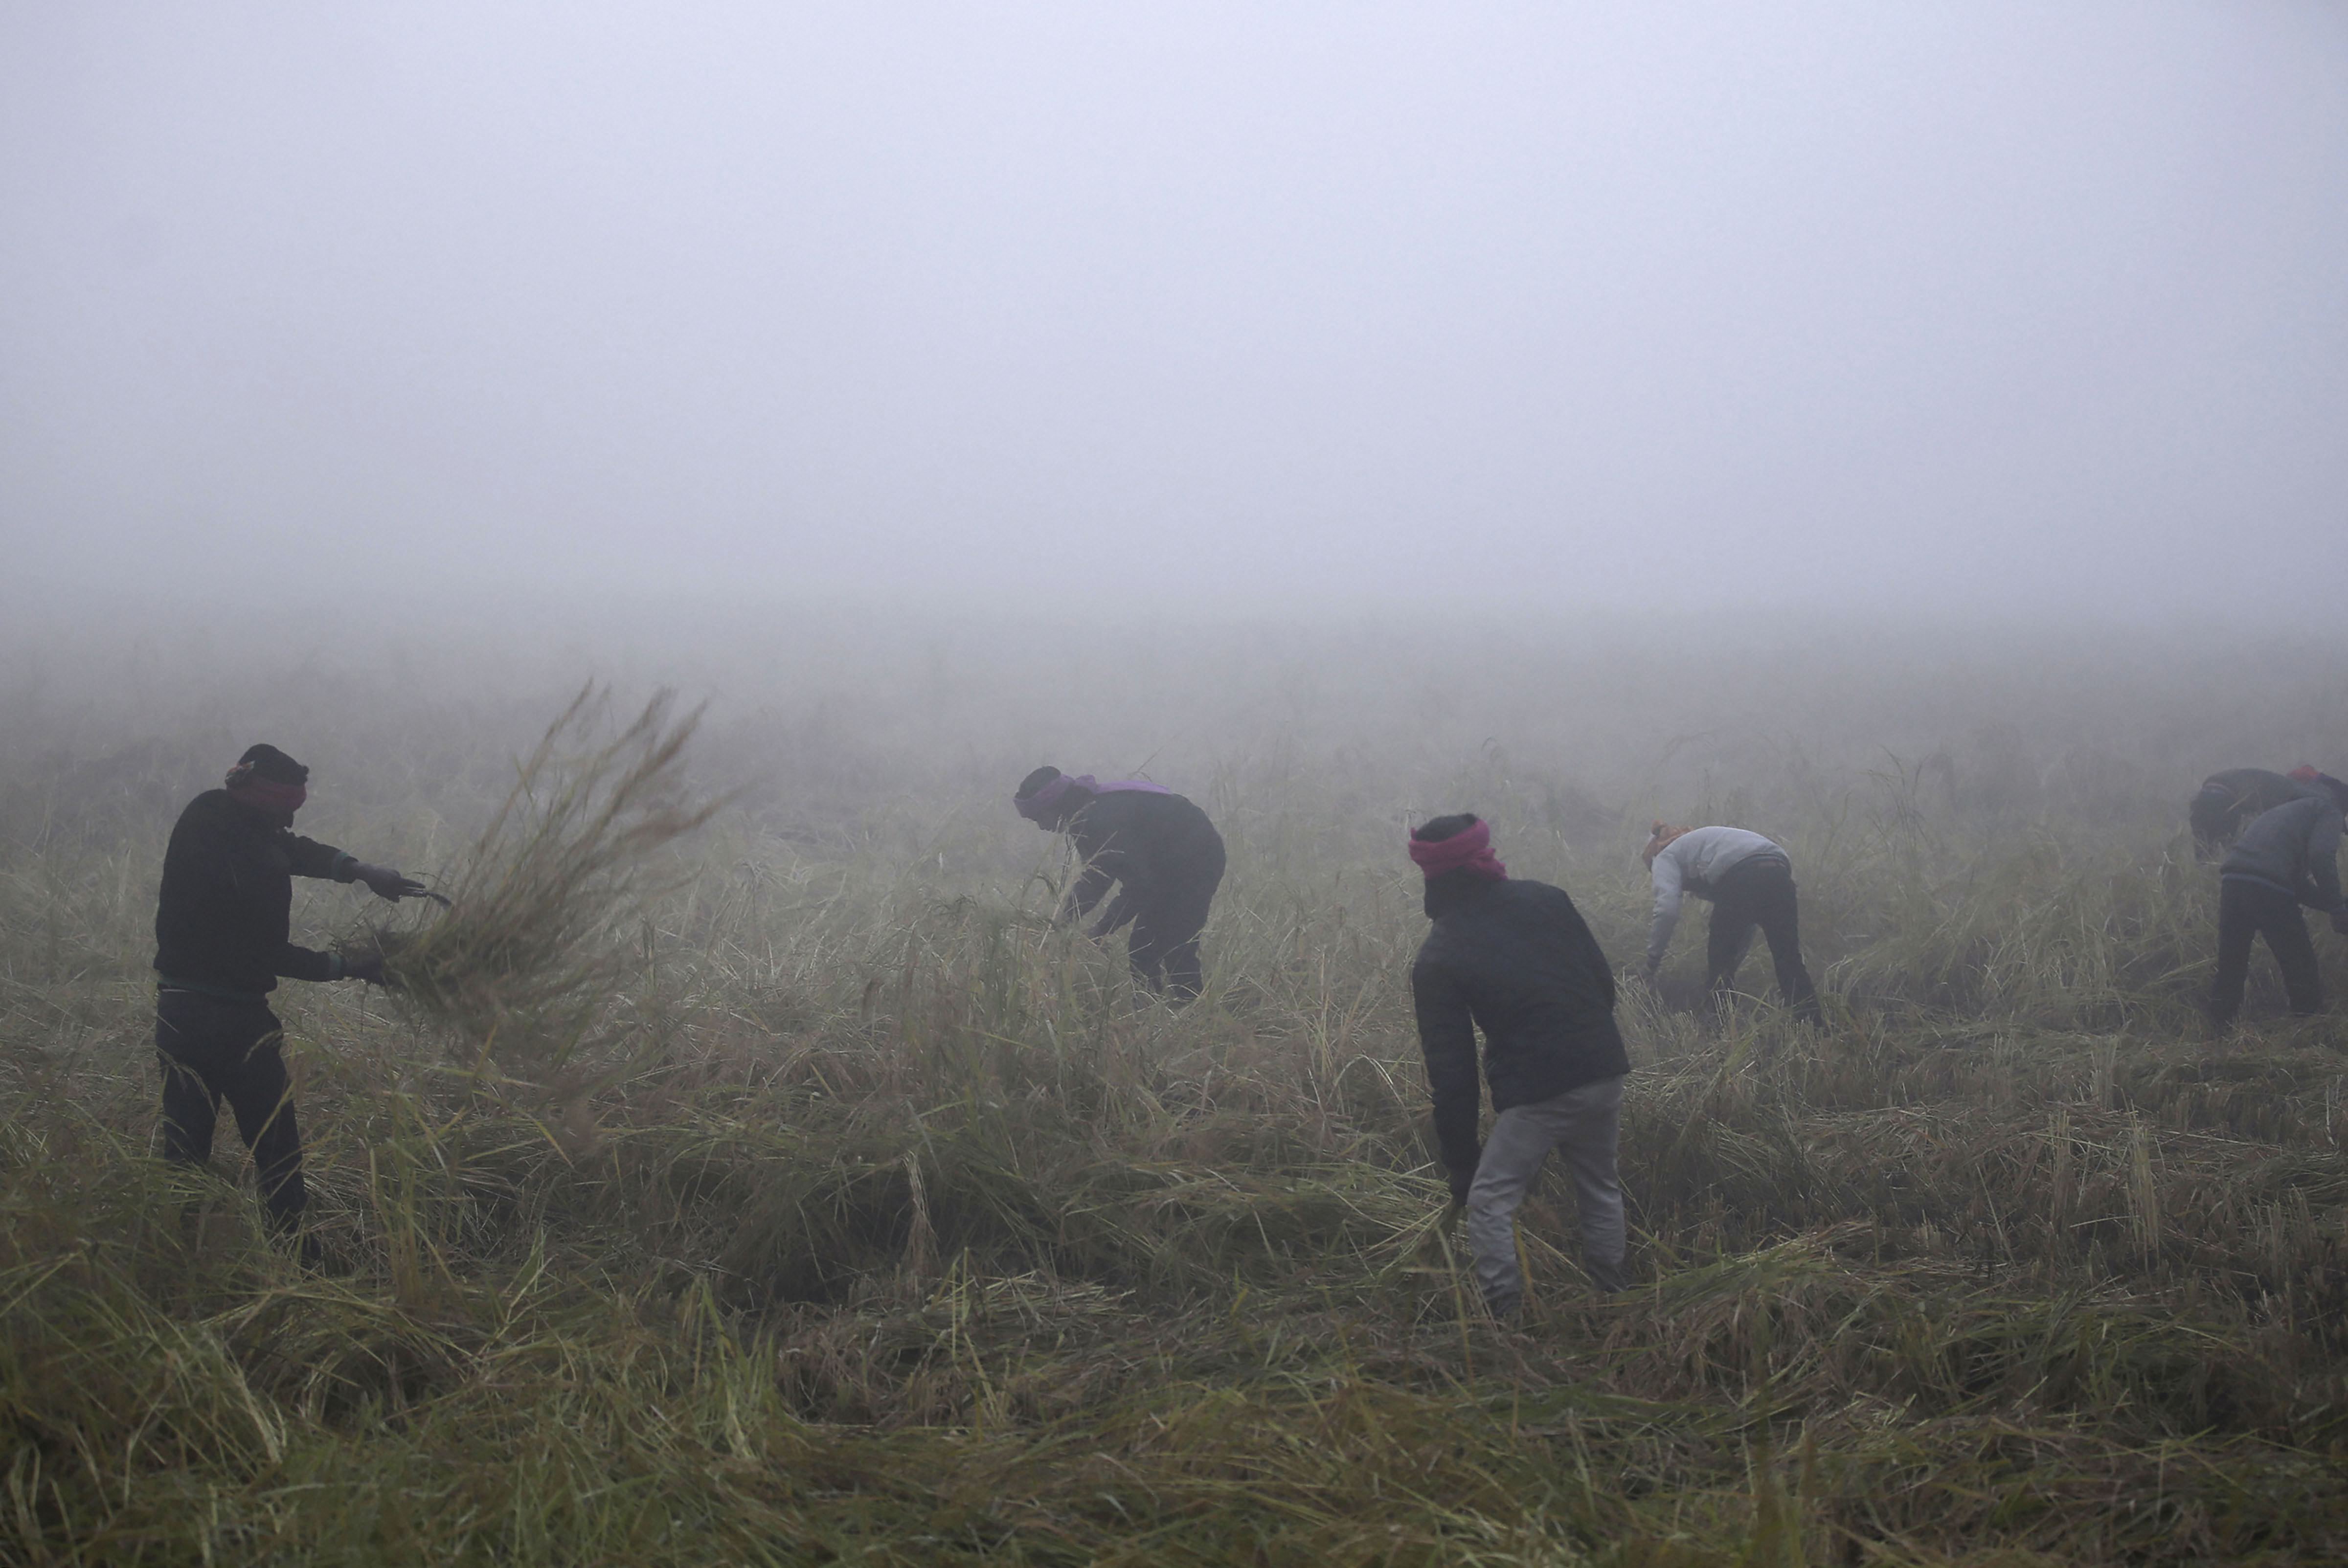 Workers harvest paddy crop amid dense fog in the outskirts of Jammu - PTI